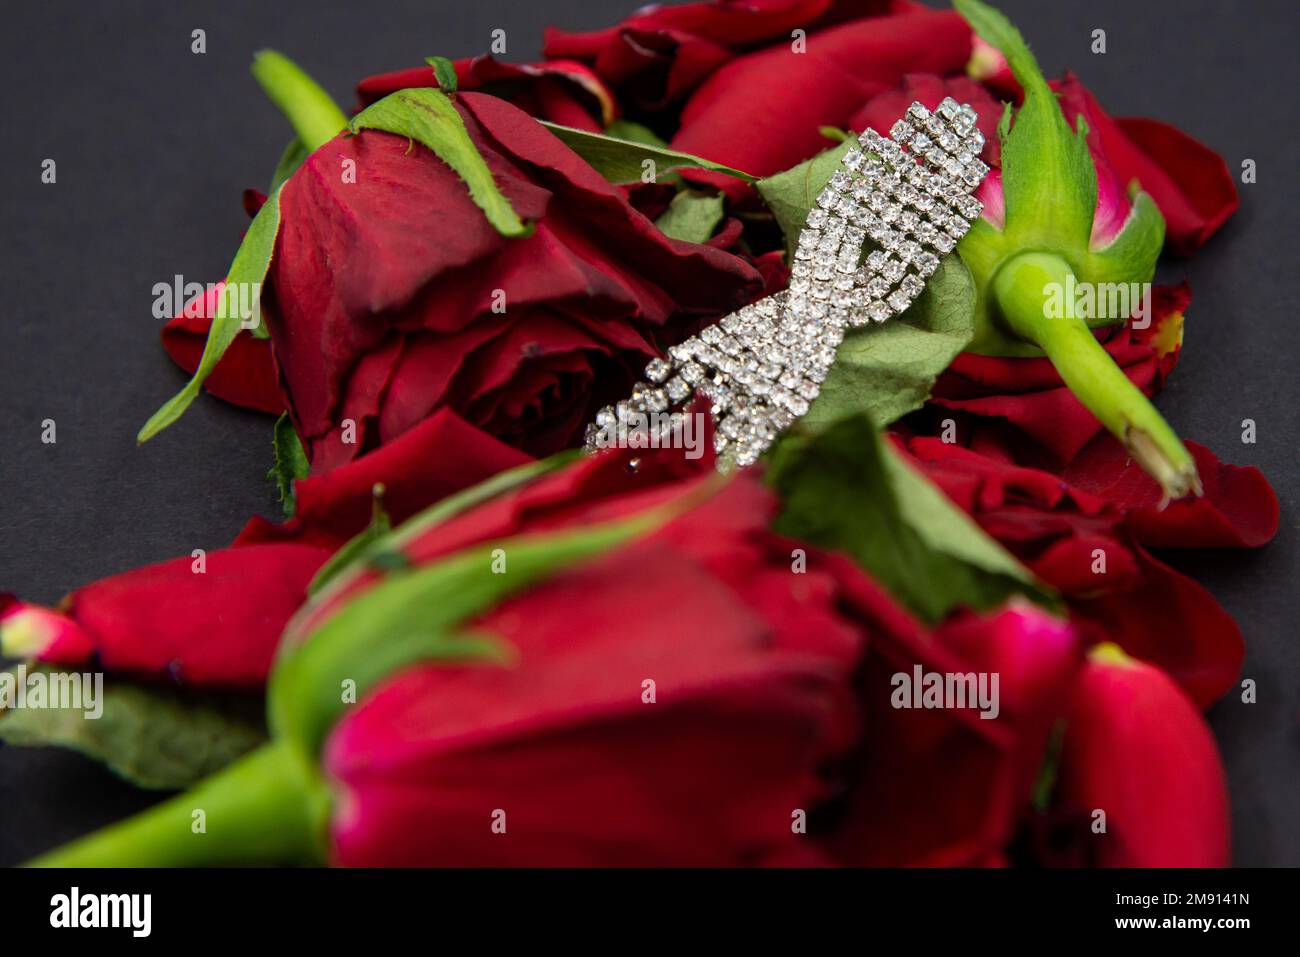 Women's diamond ornament in red rose flowers on black background. Stock Photo